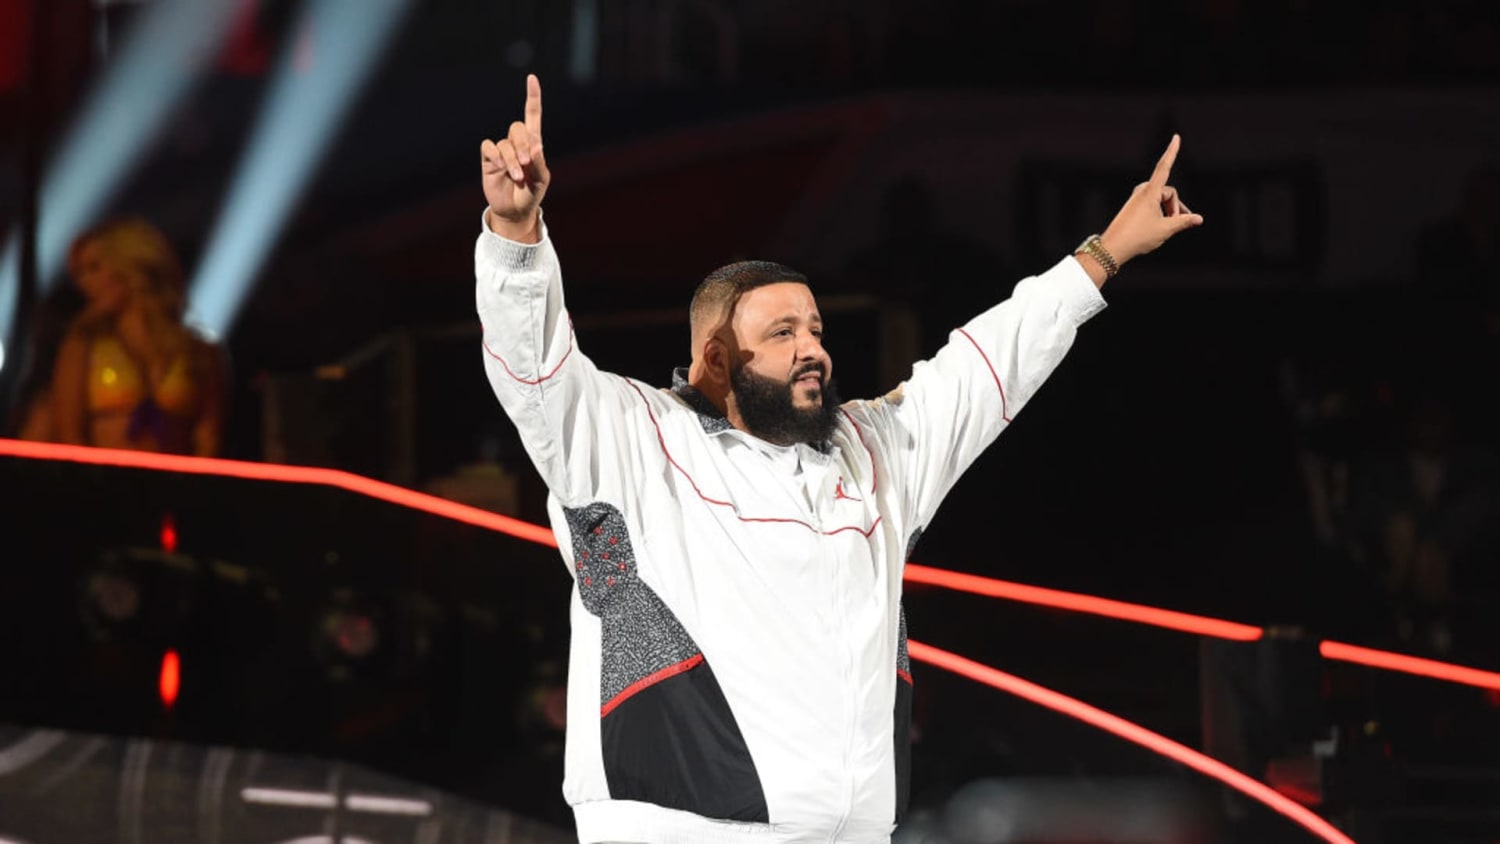 How DJ Khaled went from broke and in jail to making $24 million, working with Jay-Z